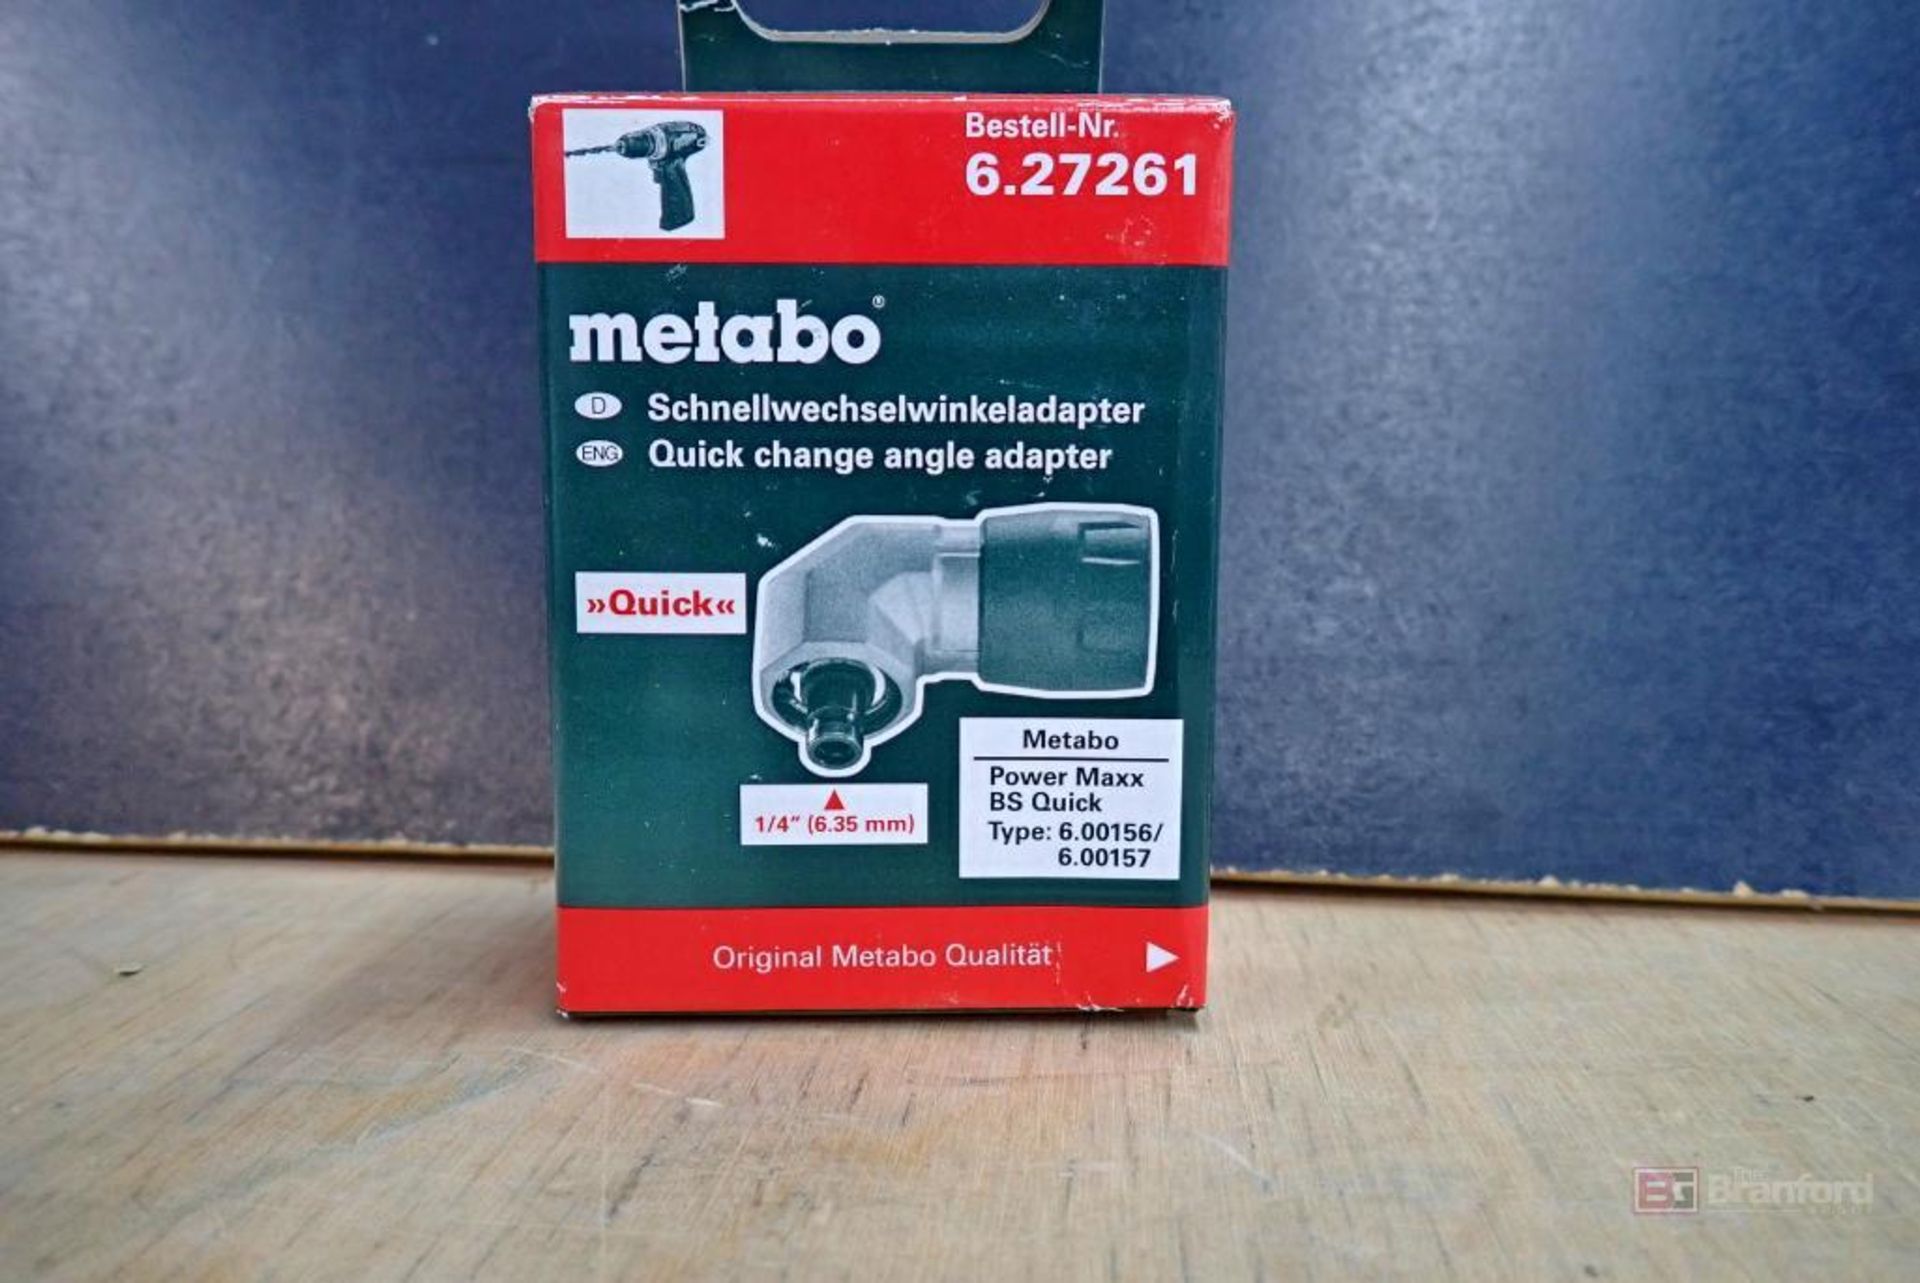 Box Lot of Metabo 6.27261 Quick Change Angle Adapters - Image 2 of 4